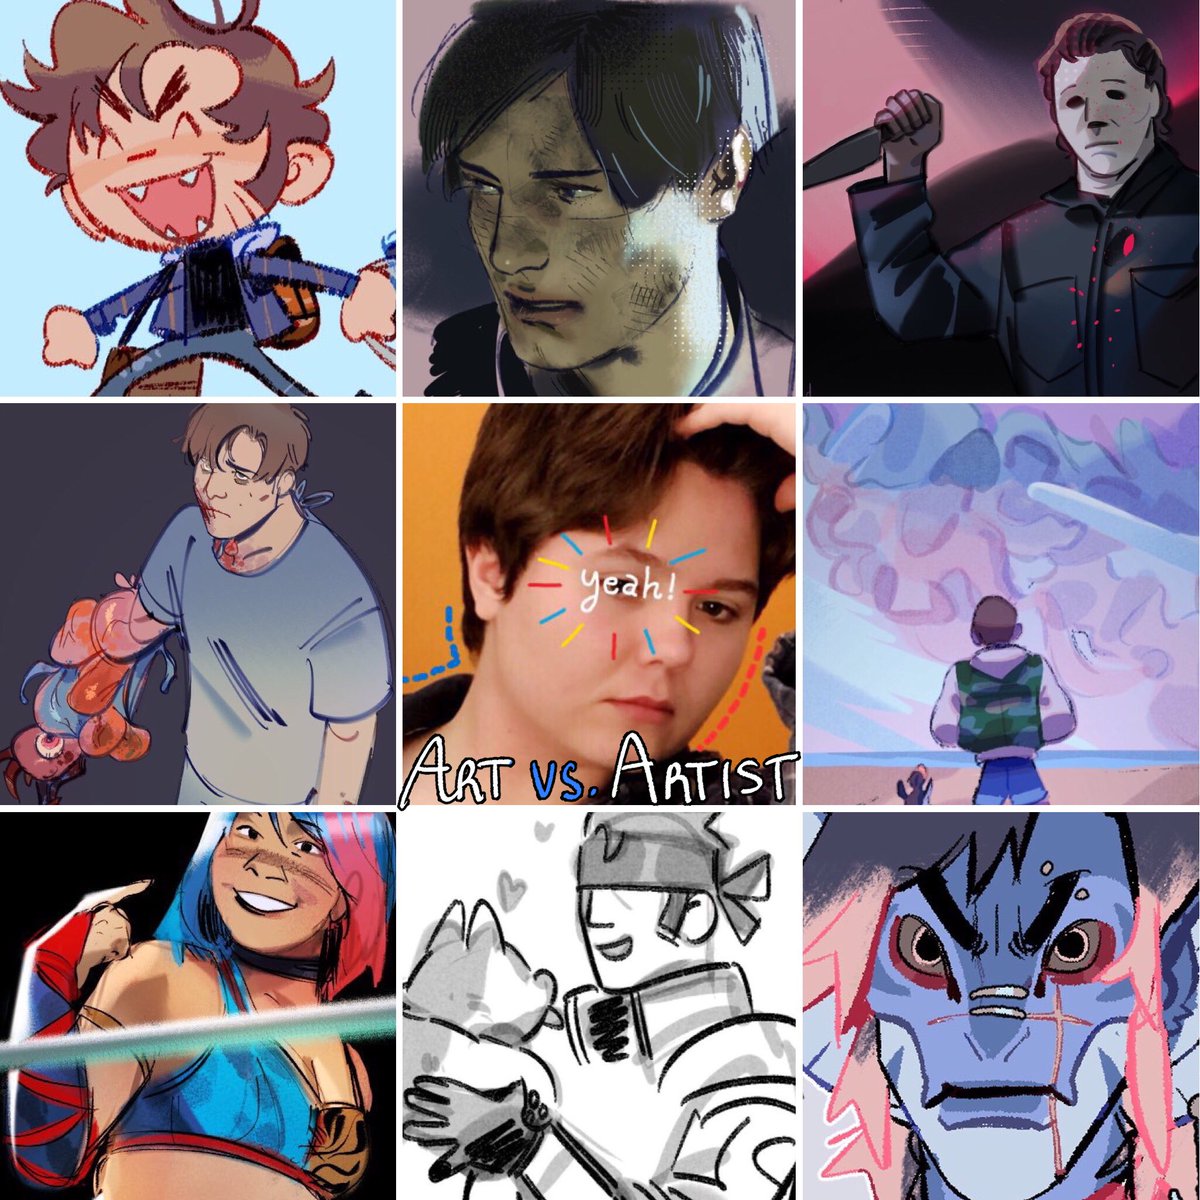 i like colours that uhhh stand out from the rest of the image it seems! #artvsartist 